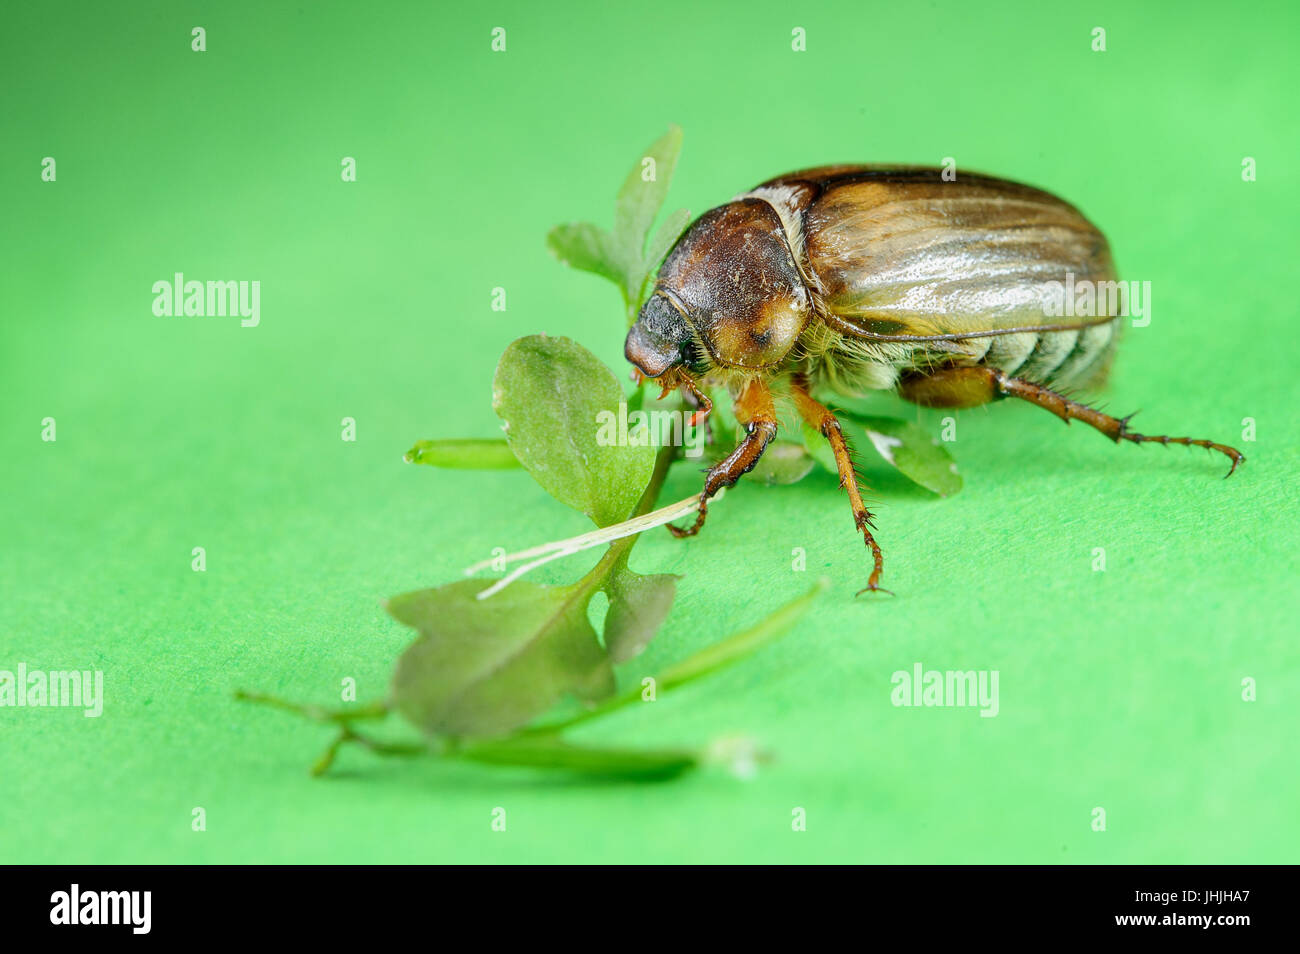 Closeup view on common cockchafer from side view on green background with leaves. Nature pest. European beetle Stock Photo